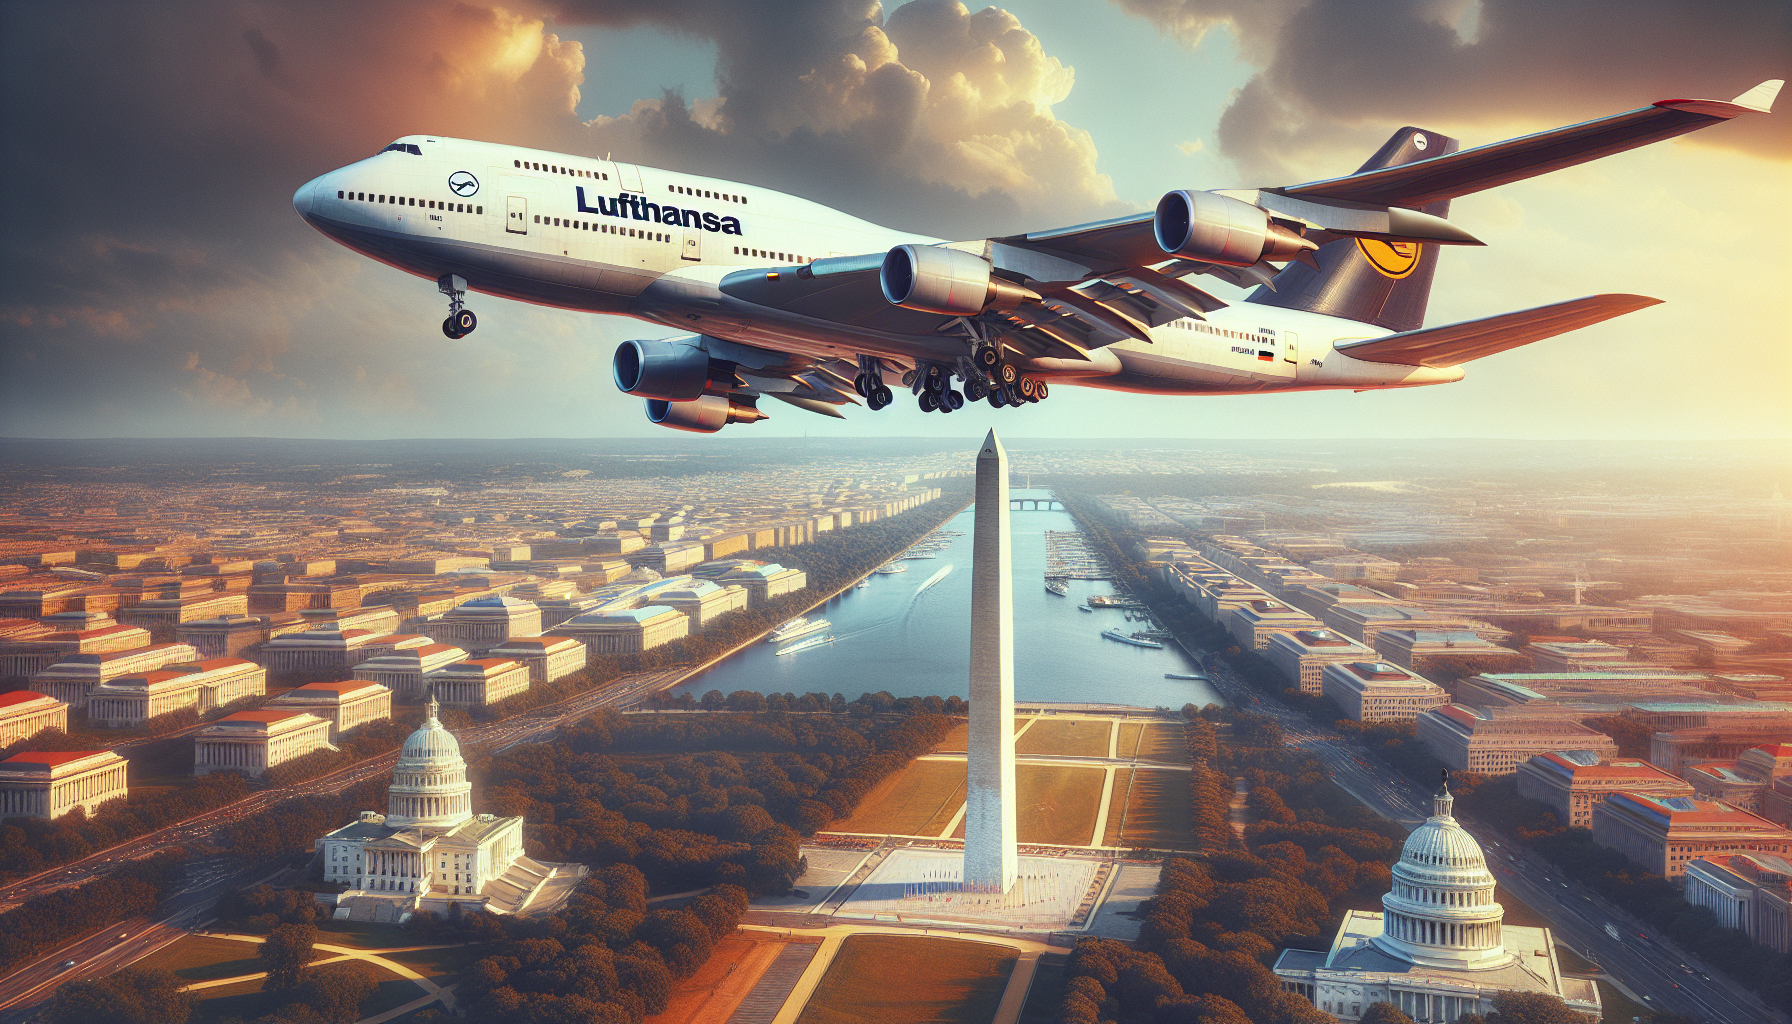 discover the historic event with lufthansa: the very first flight of the a380 to washington dc, a major milestone in international aviation.